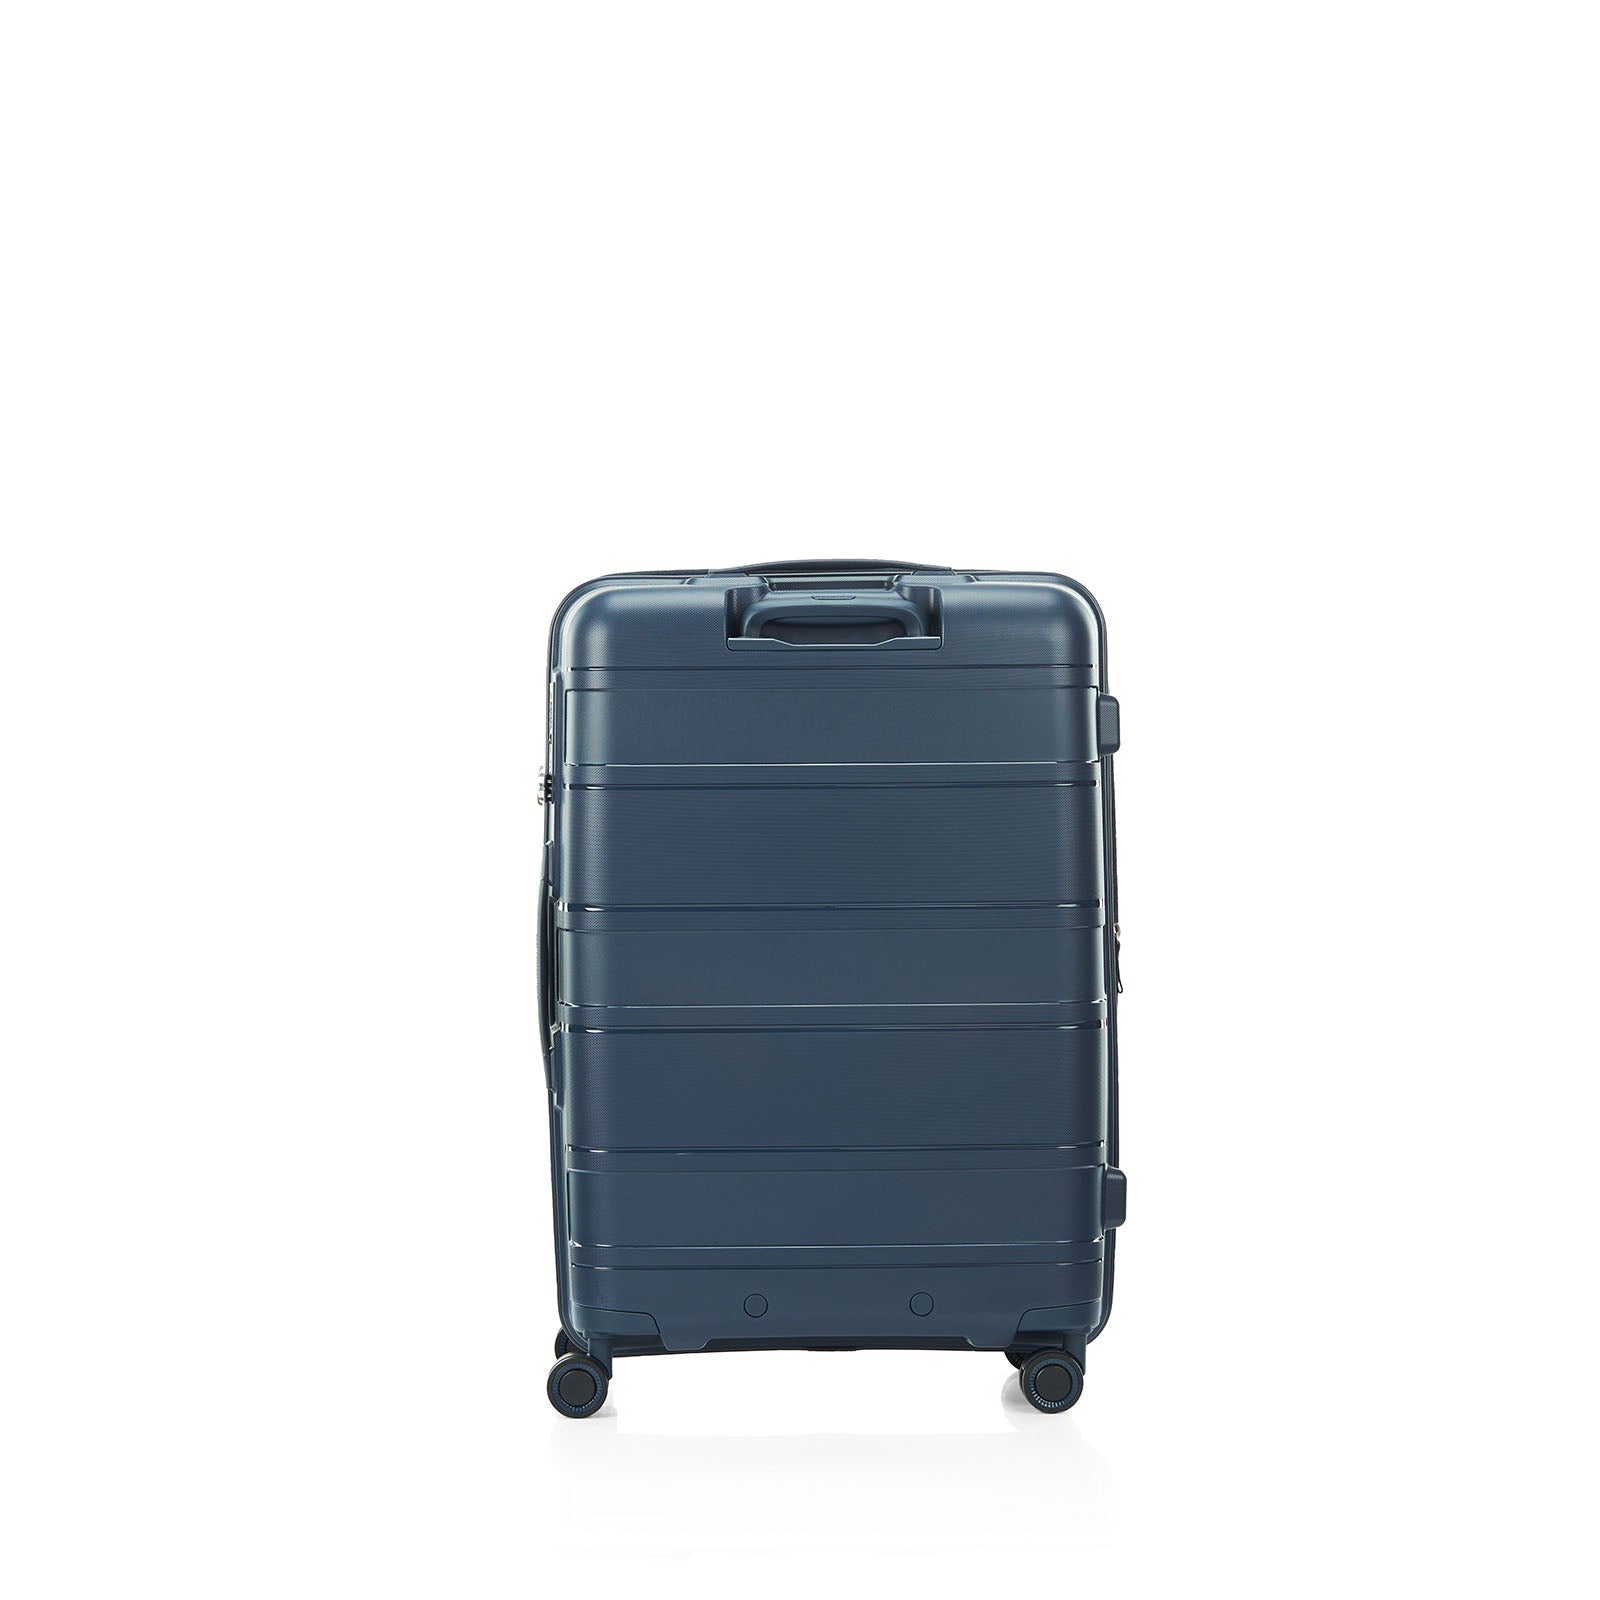 American-Tourister-Light-Max-69cm-Suitcase-Navy-Back